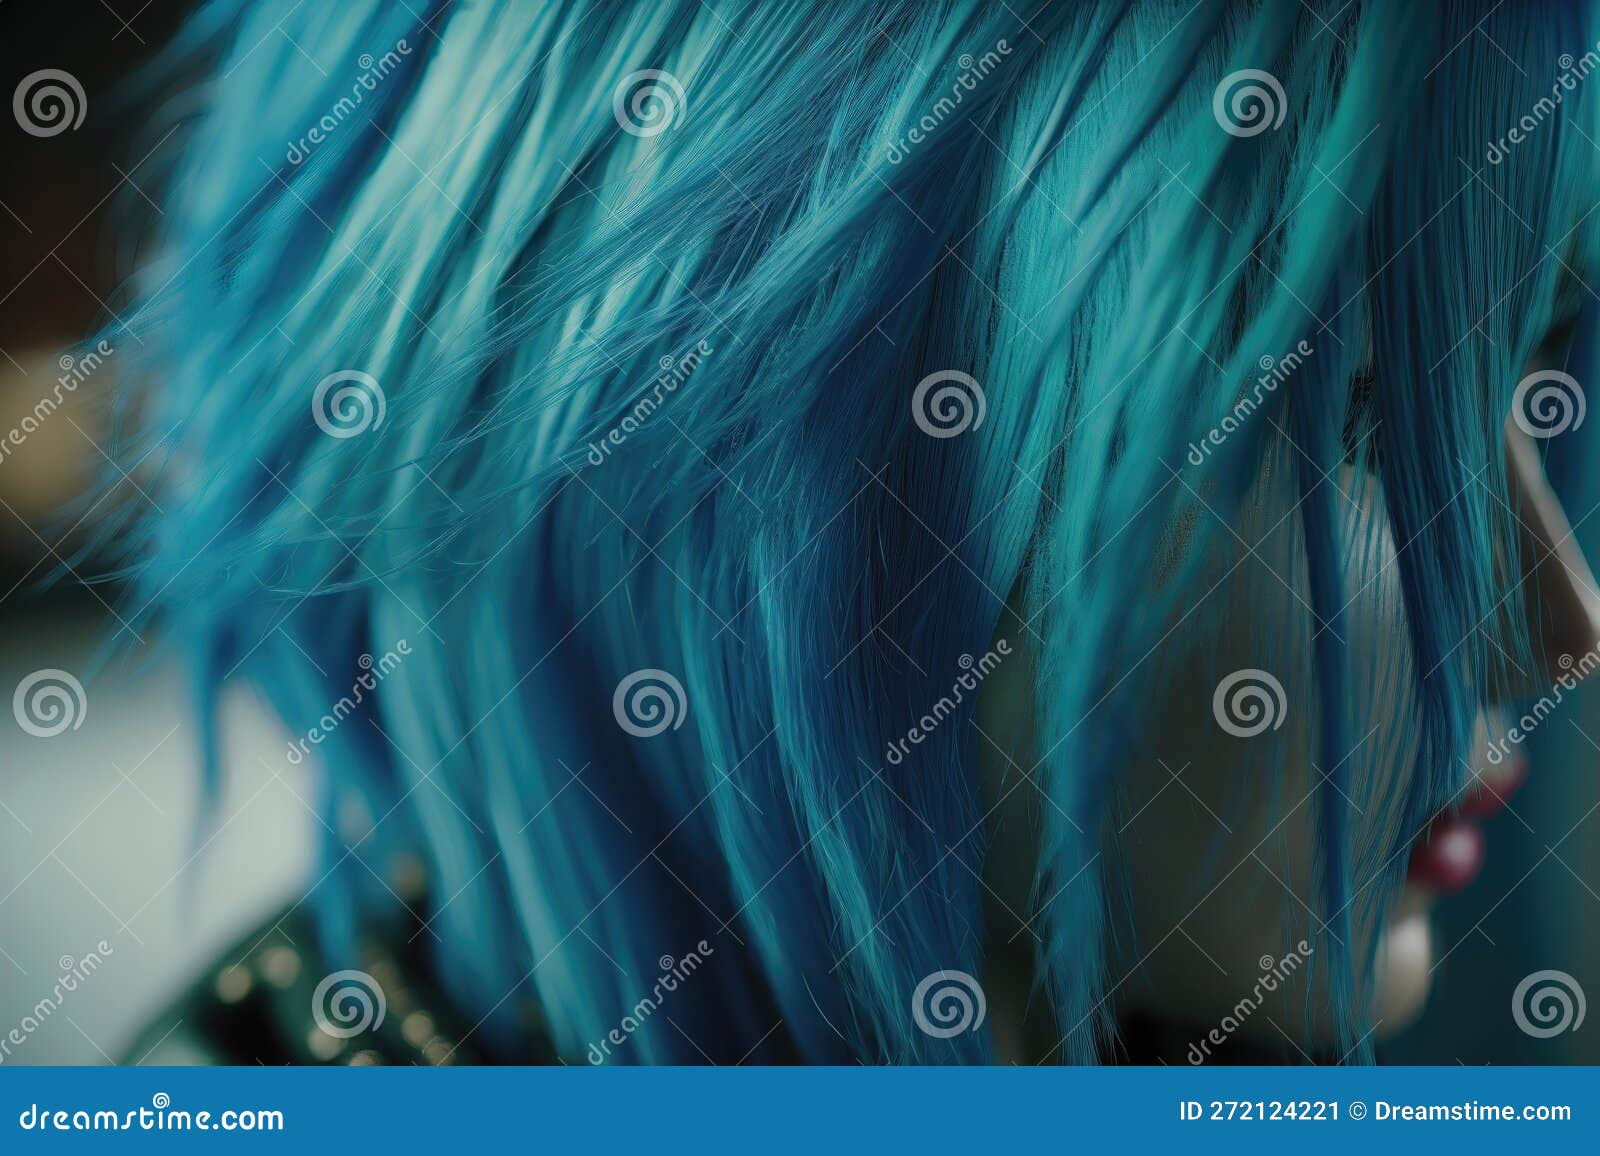 Blue hair girl close-up - wide 5